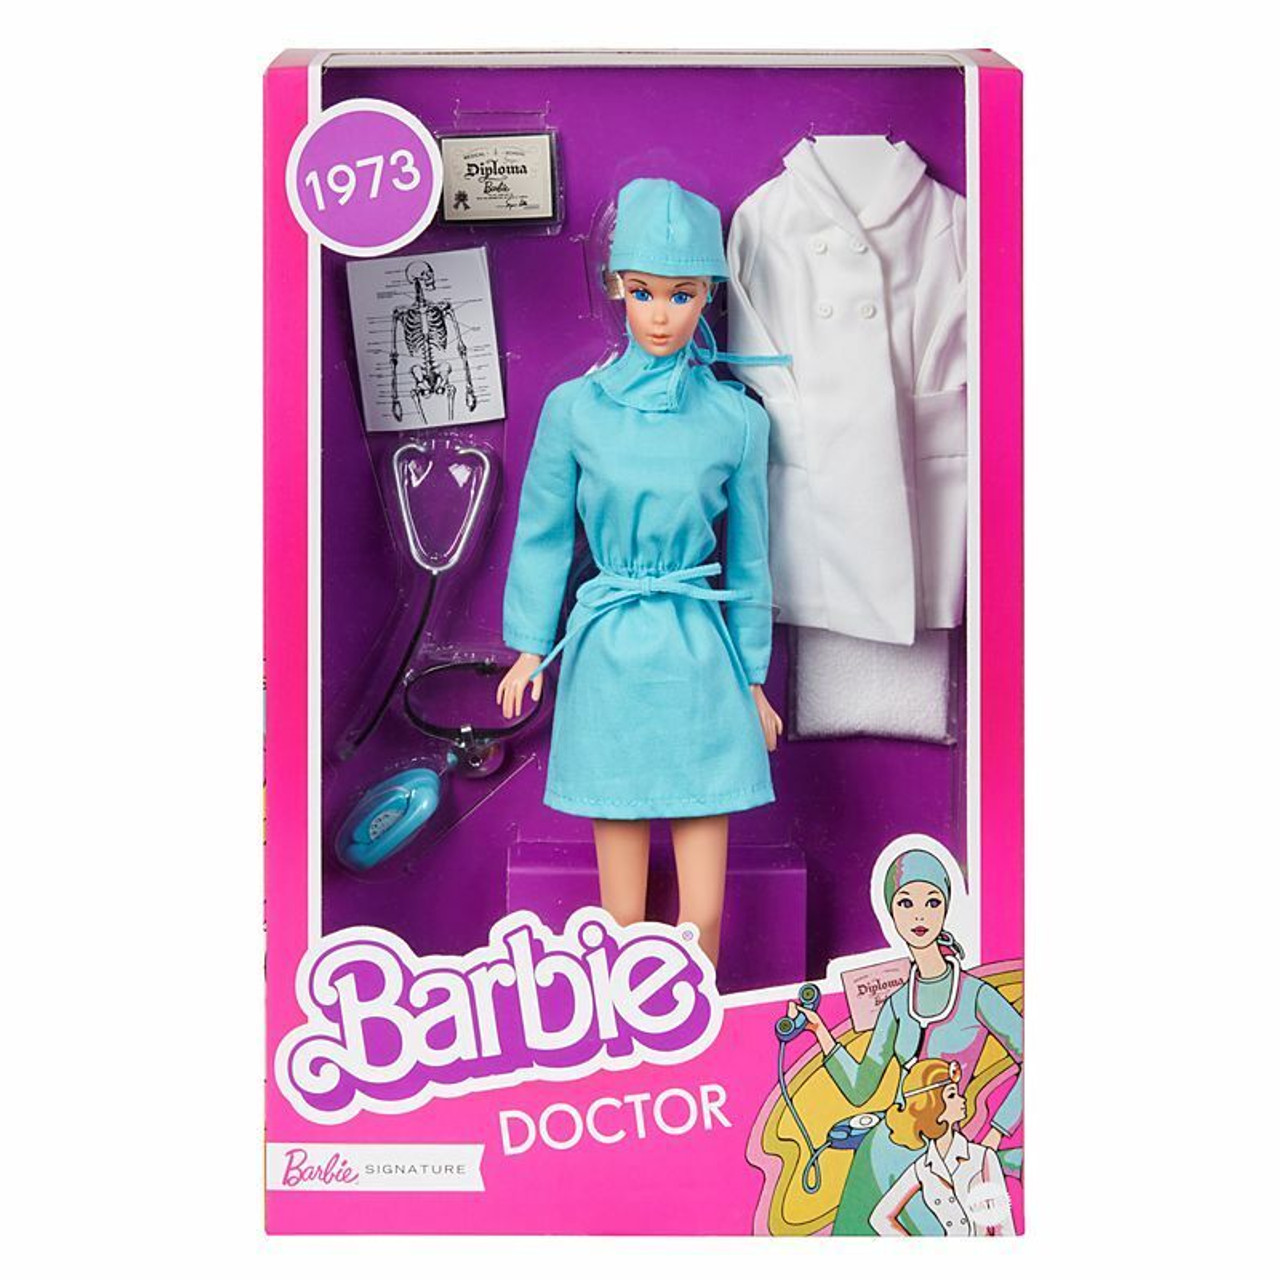 List of upcoming Barbie Collector Signature dolls in 2021. Barbie